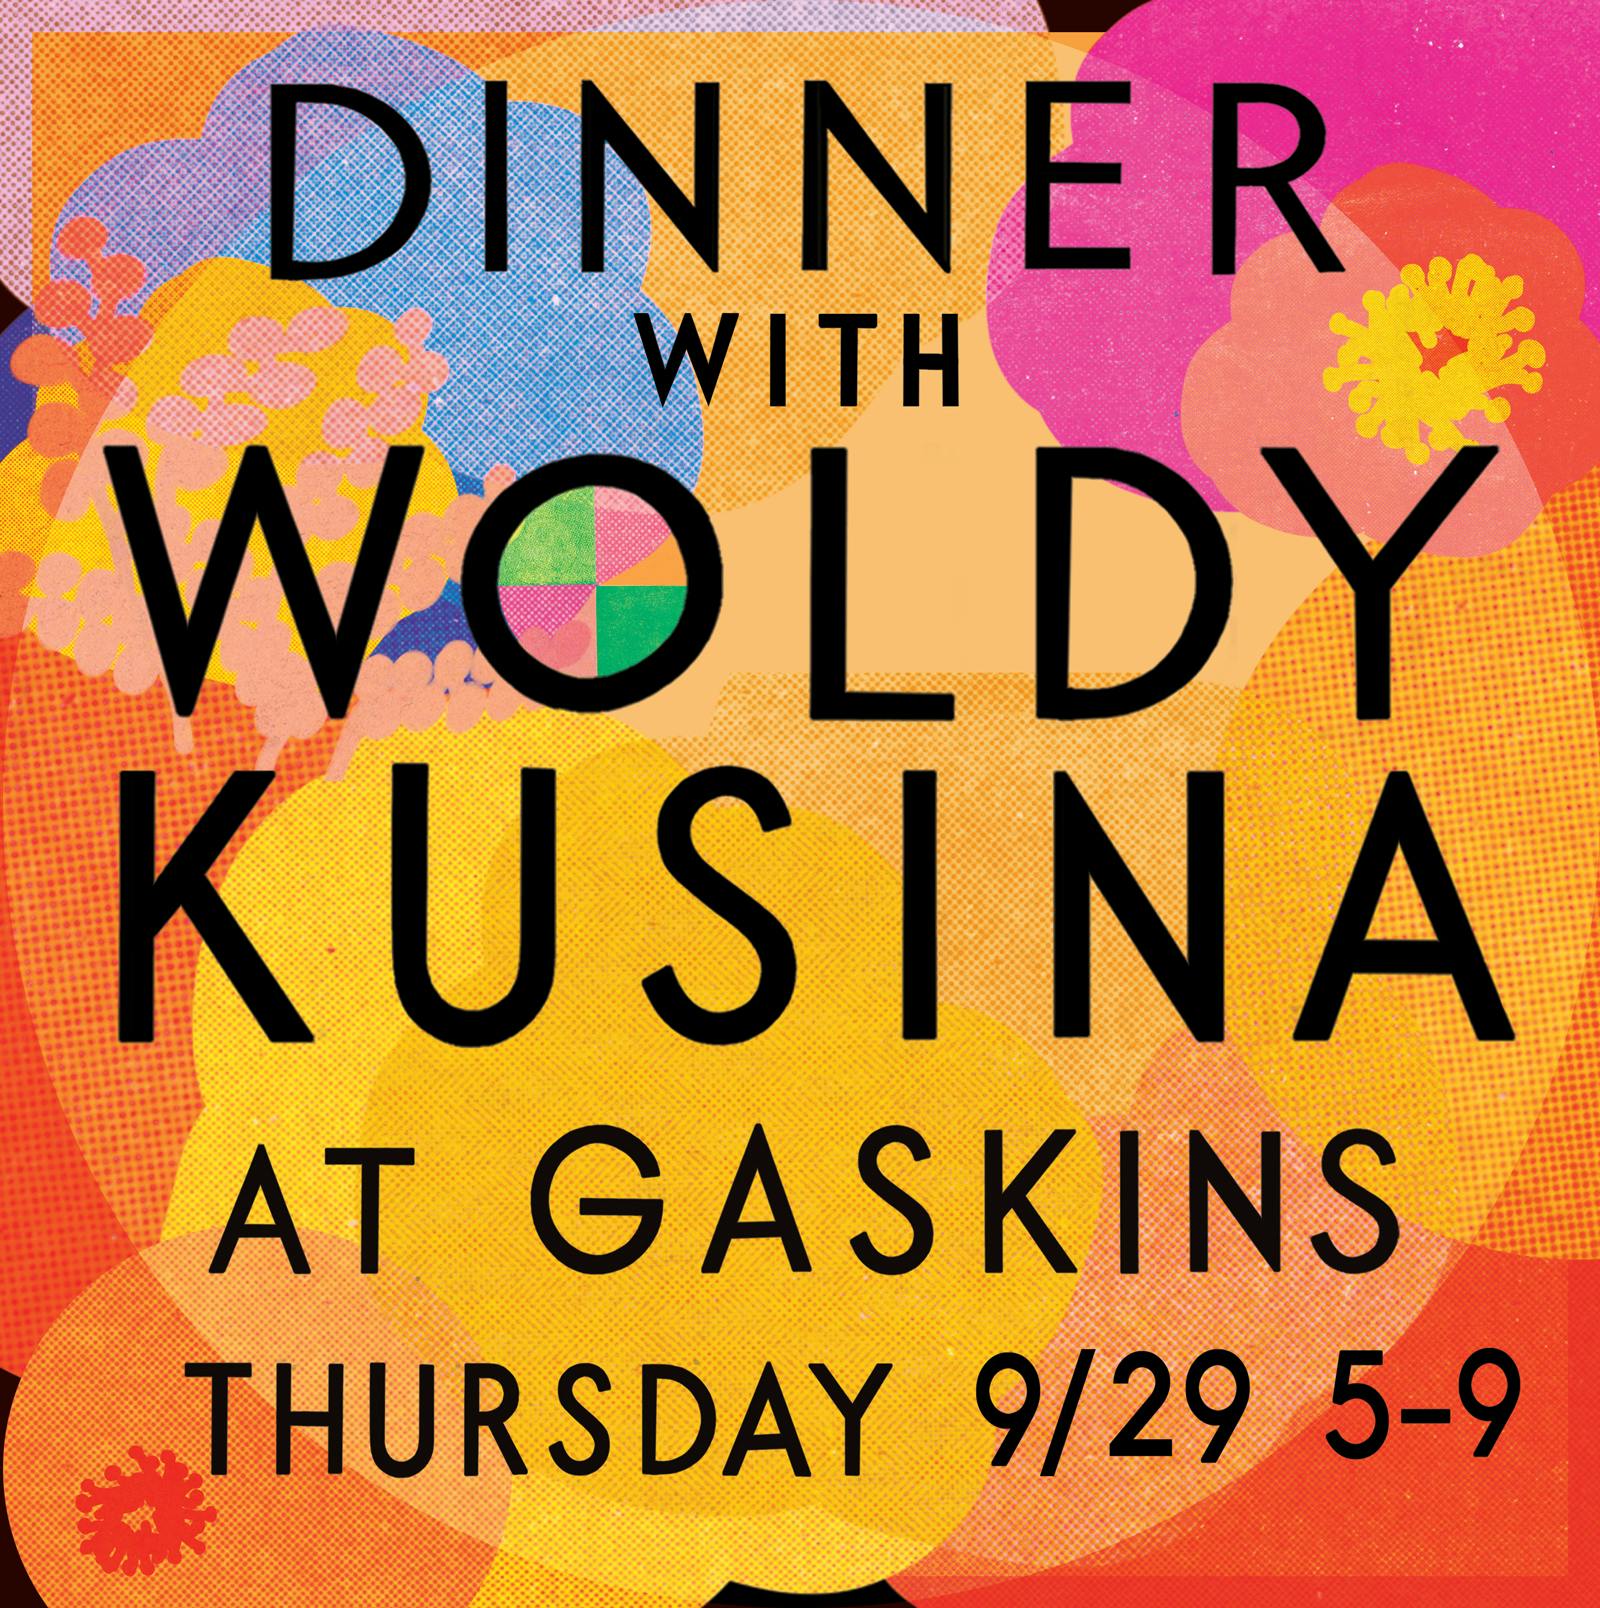 Dinner with Woldy Kusina at Gaskins 